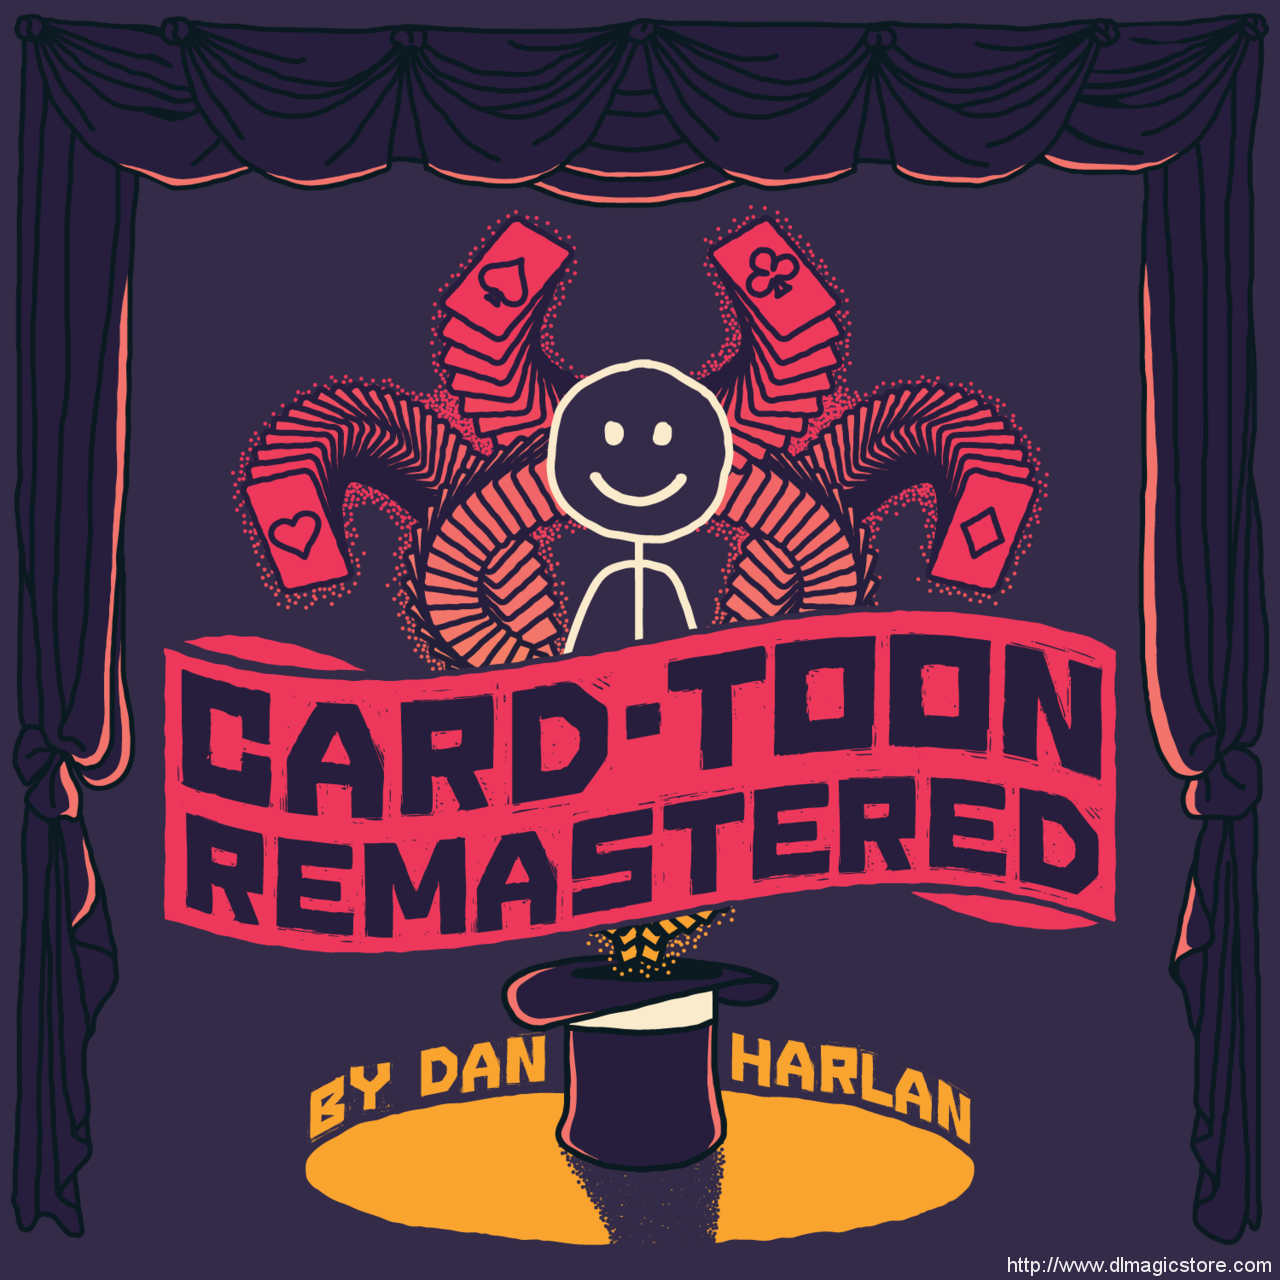 Card-Toon Remastered by Dan Harlan (Gimmick Not Included)